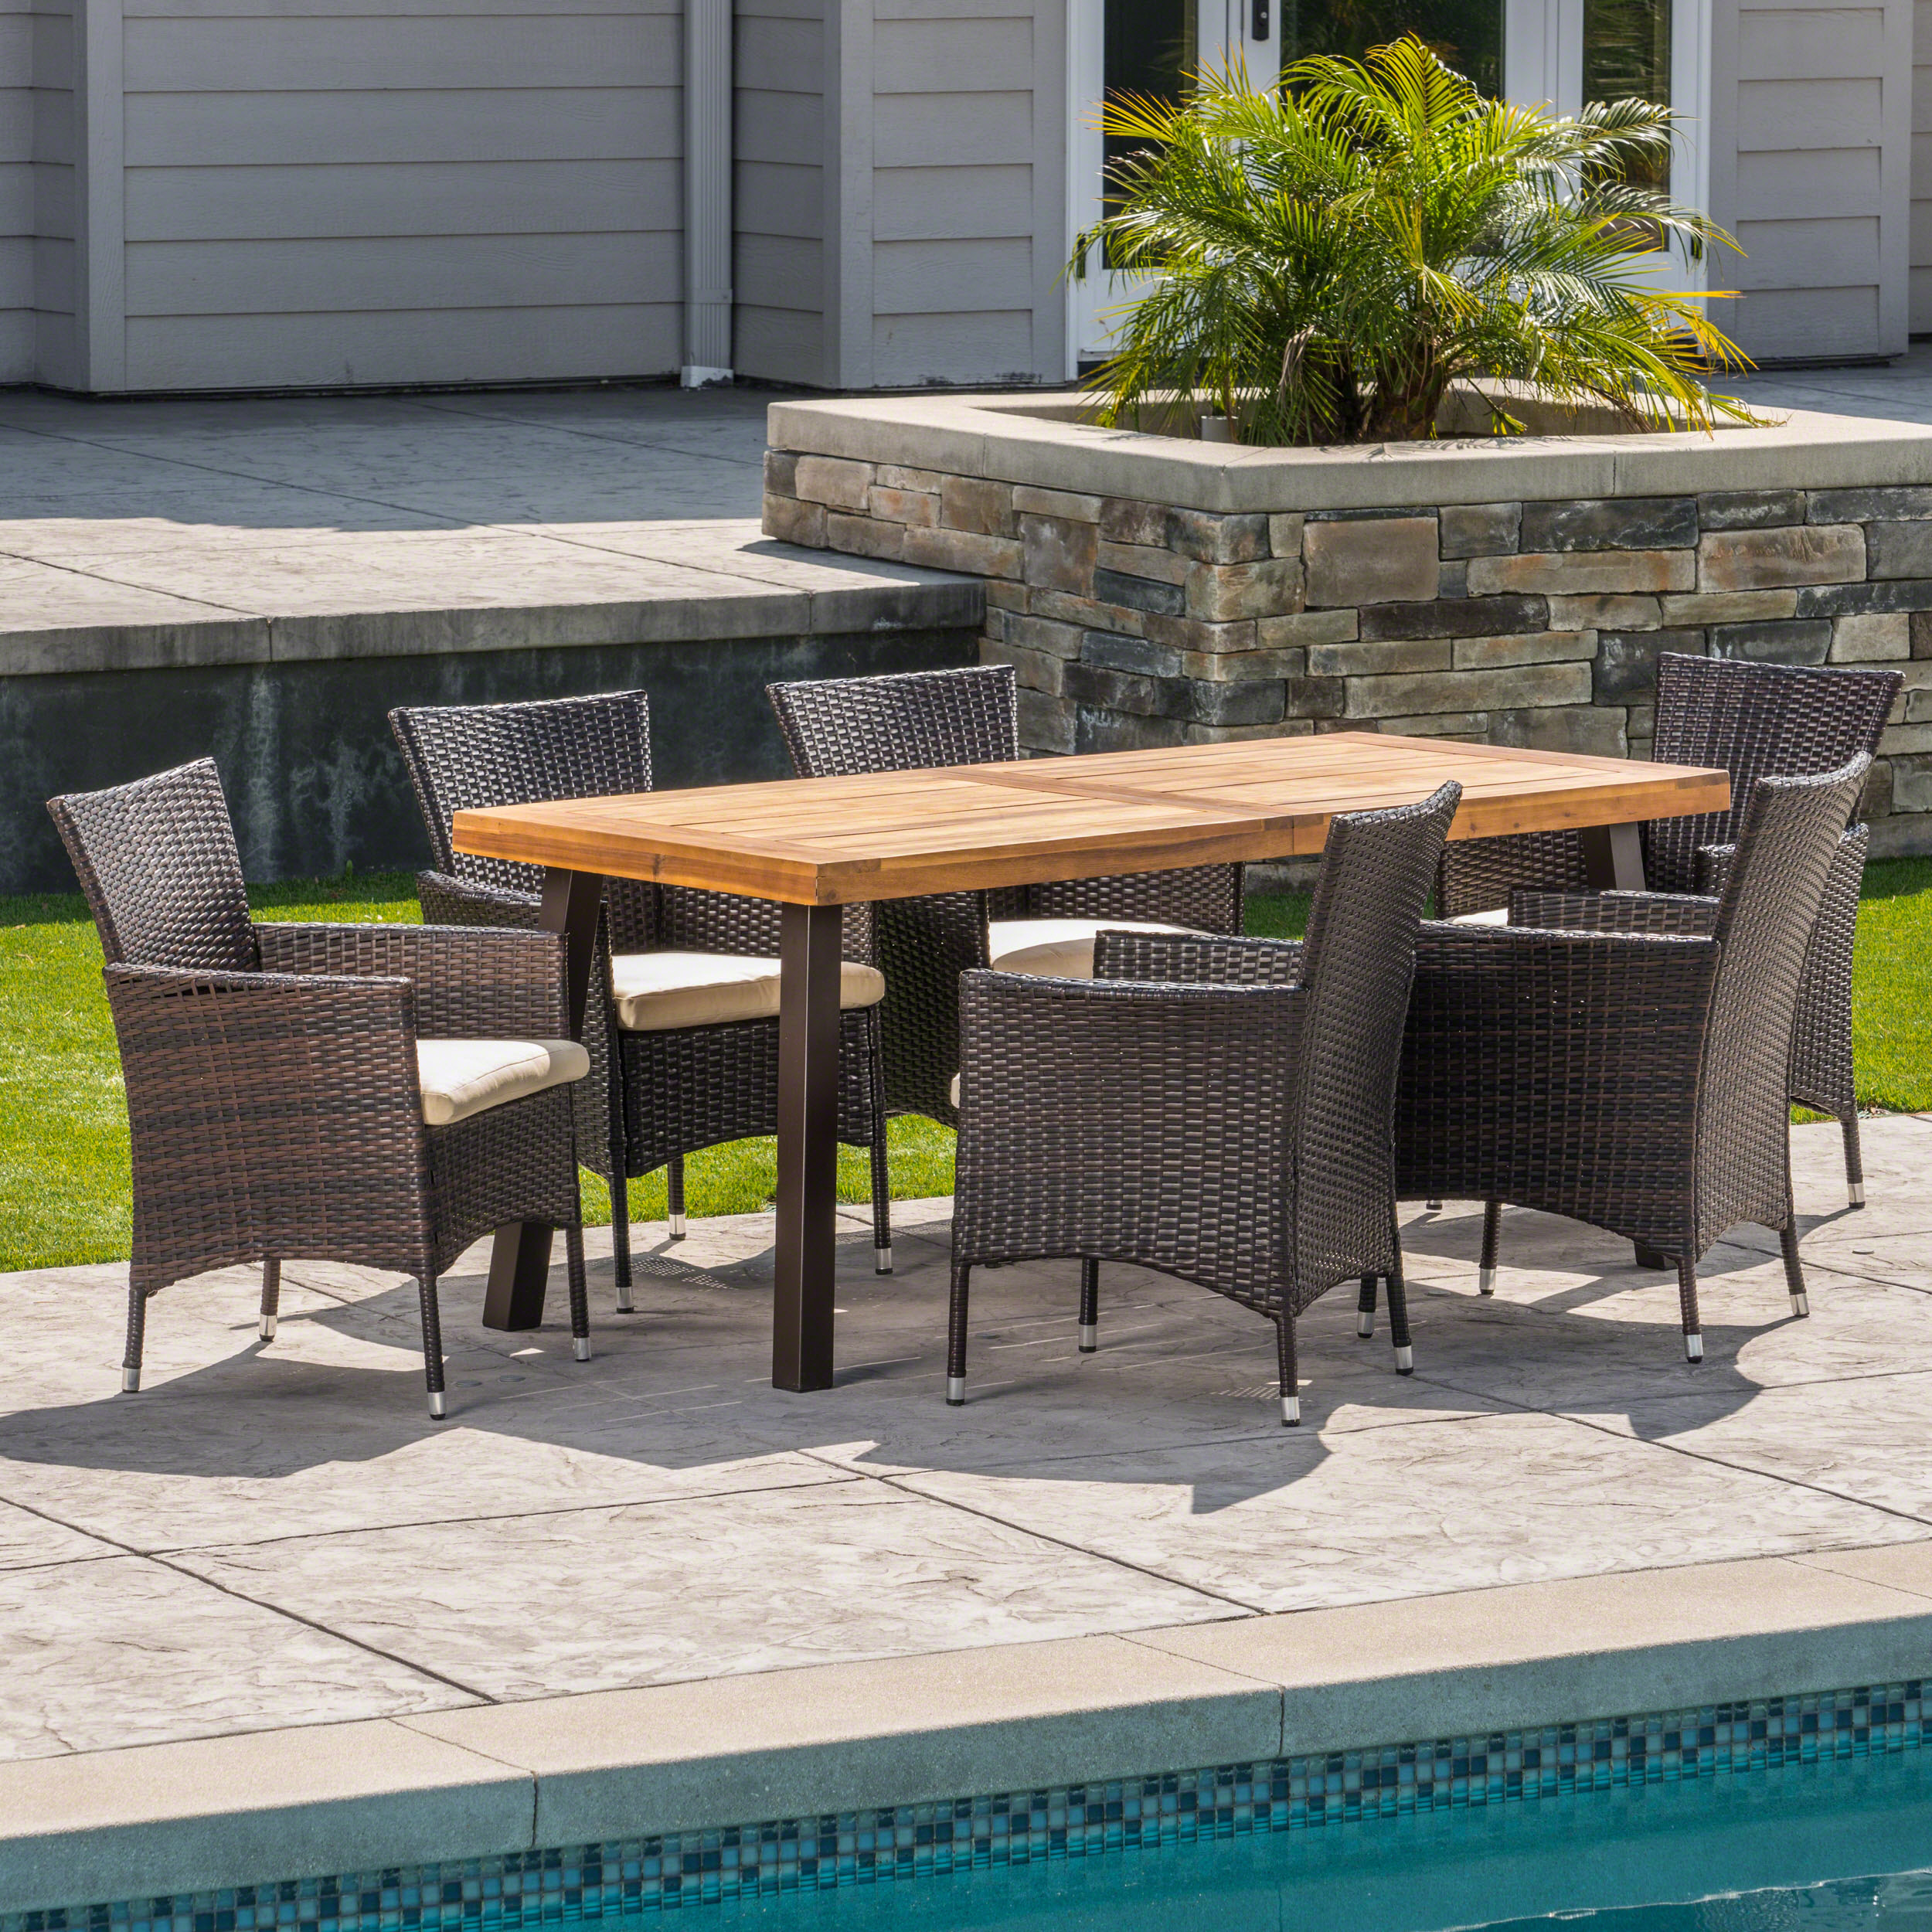 Outdoor 7 Piece Acacia Wood/Wicker Dining Set with Cushions, Multibrown, Beige, Teak - image 5 of 7